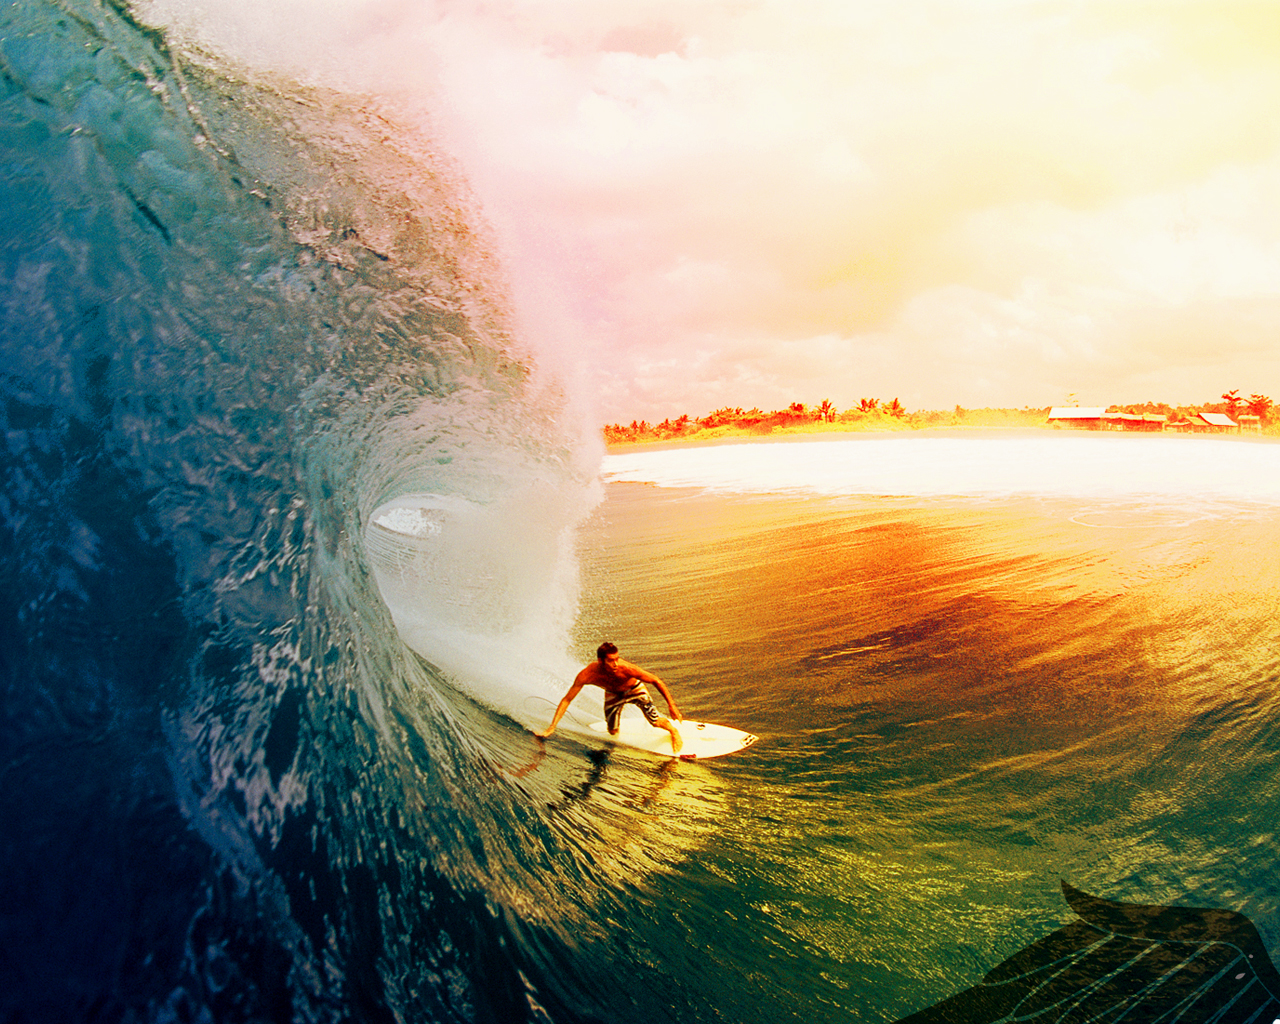 14 Cool Surfing Wallpapers | Surf Pictures and Videos